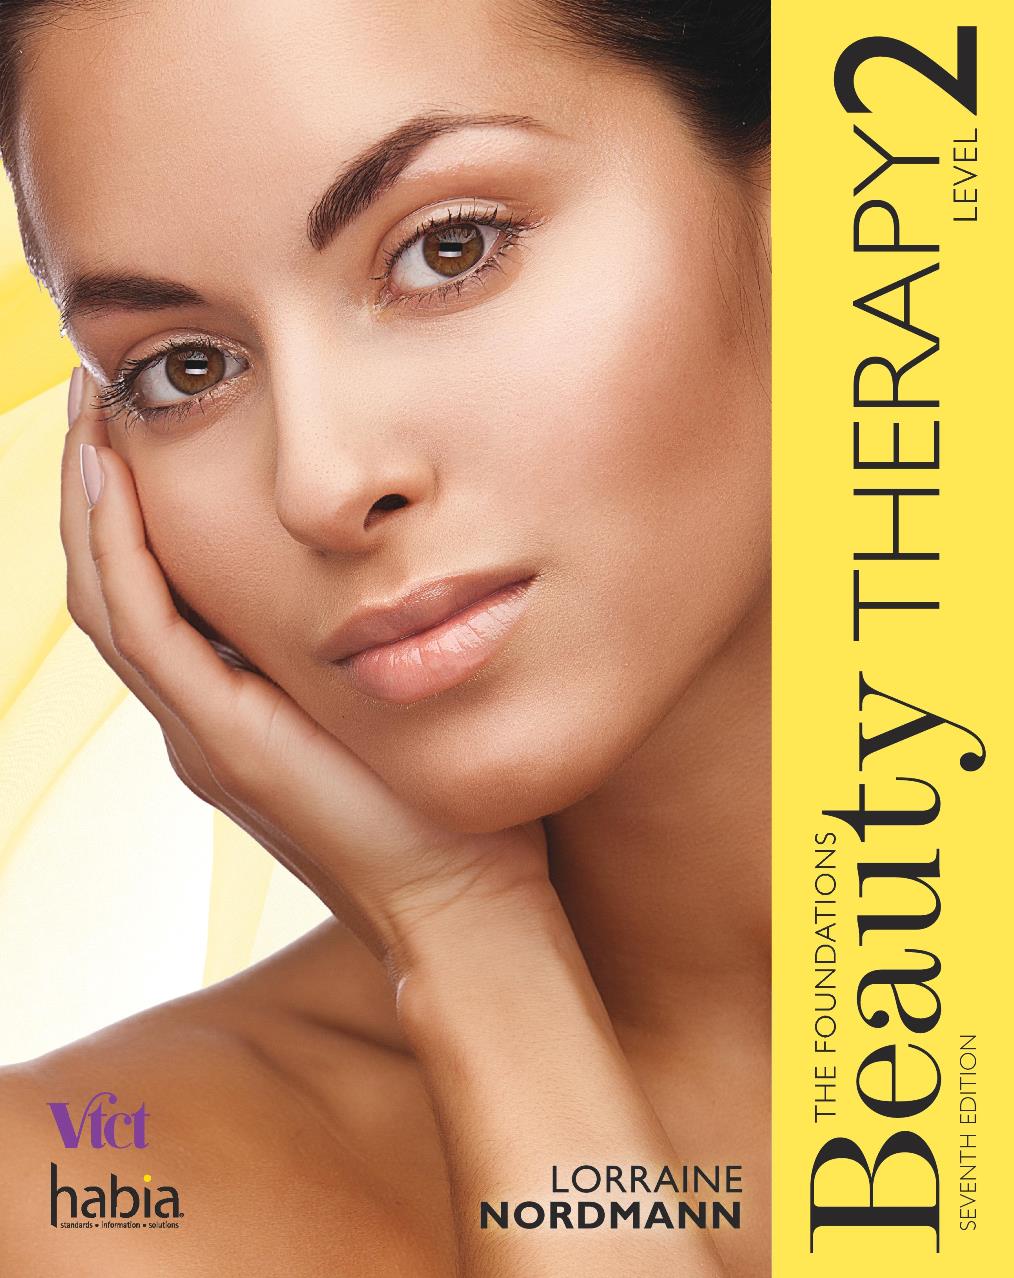 Form 005 - Level 2 Beauty Therapy